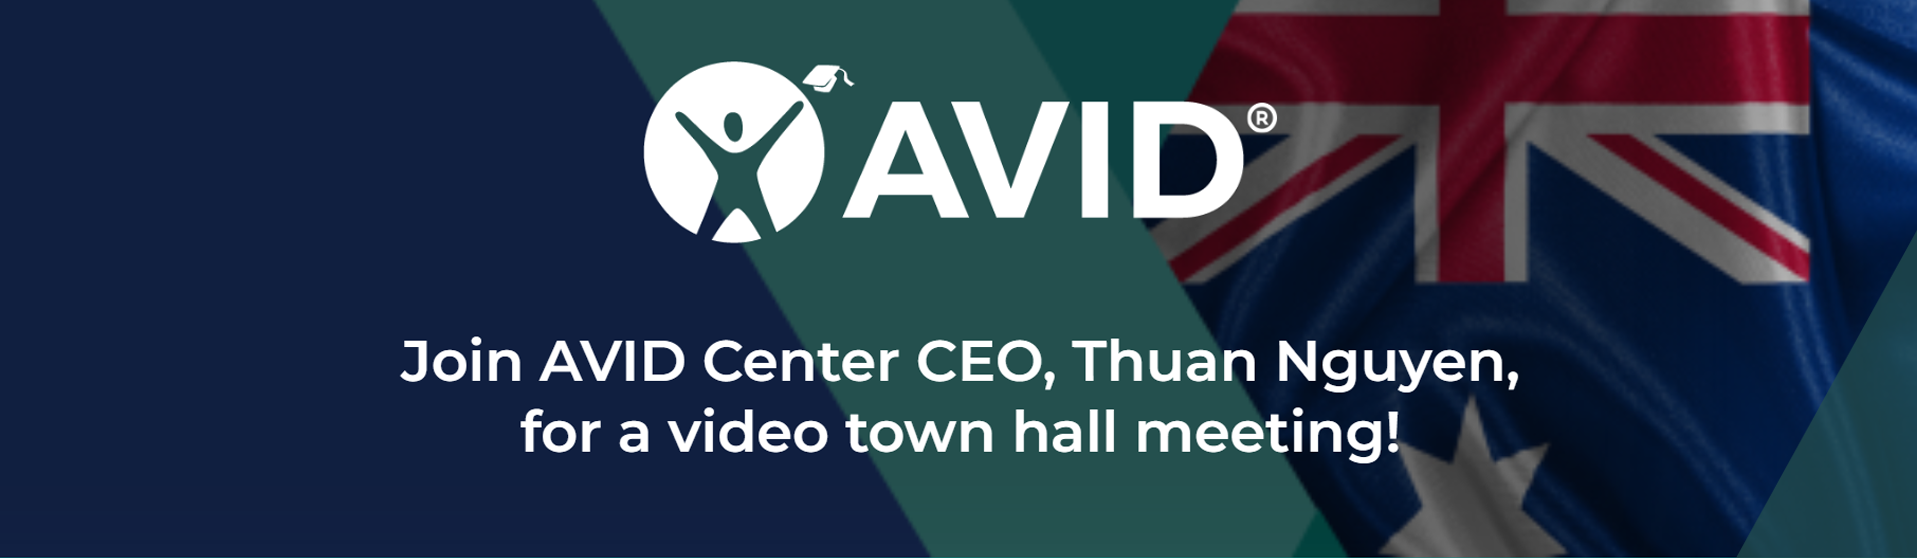 Join AVID Center CEO, Thuan Nguyen, for a video town hall meeting!